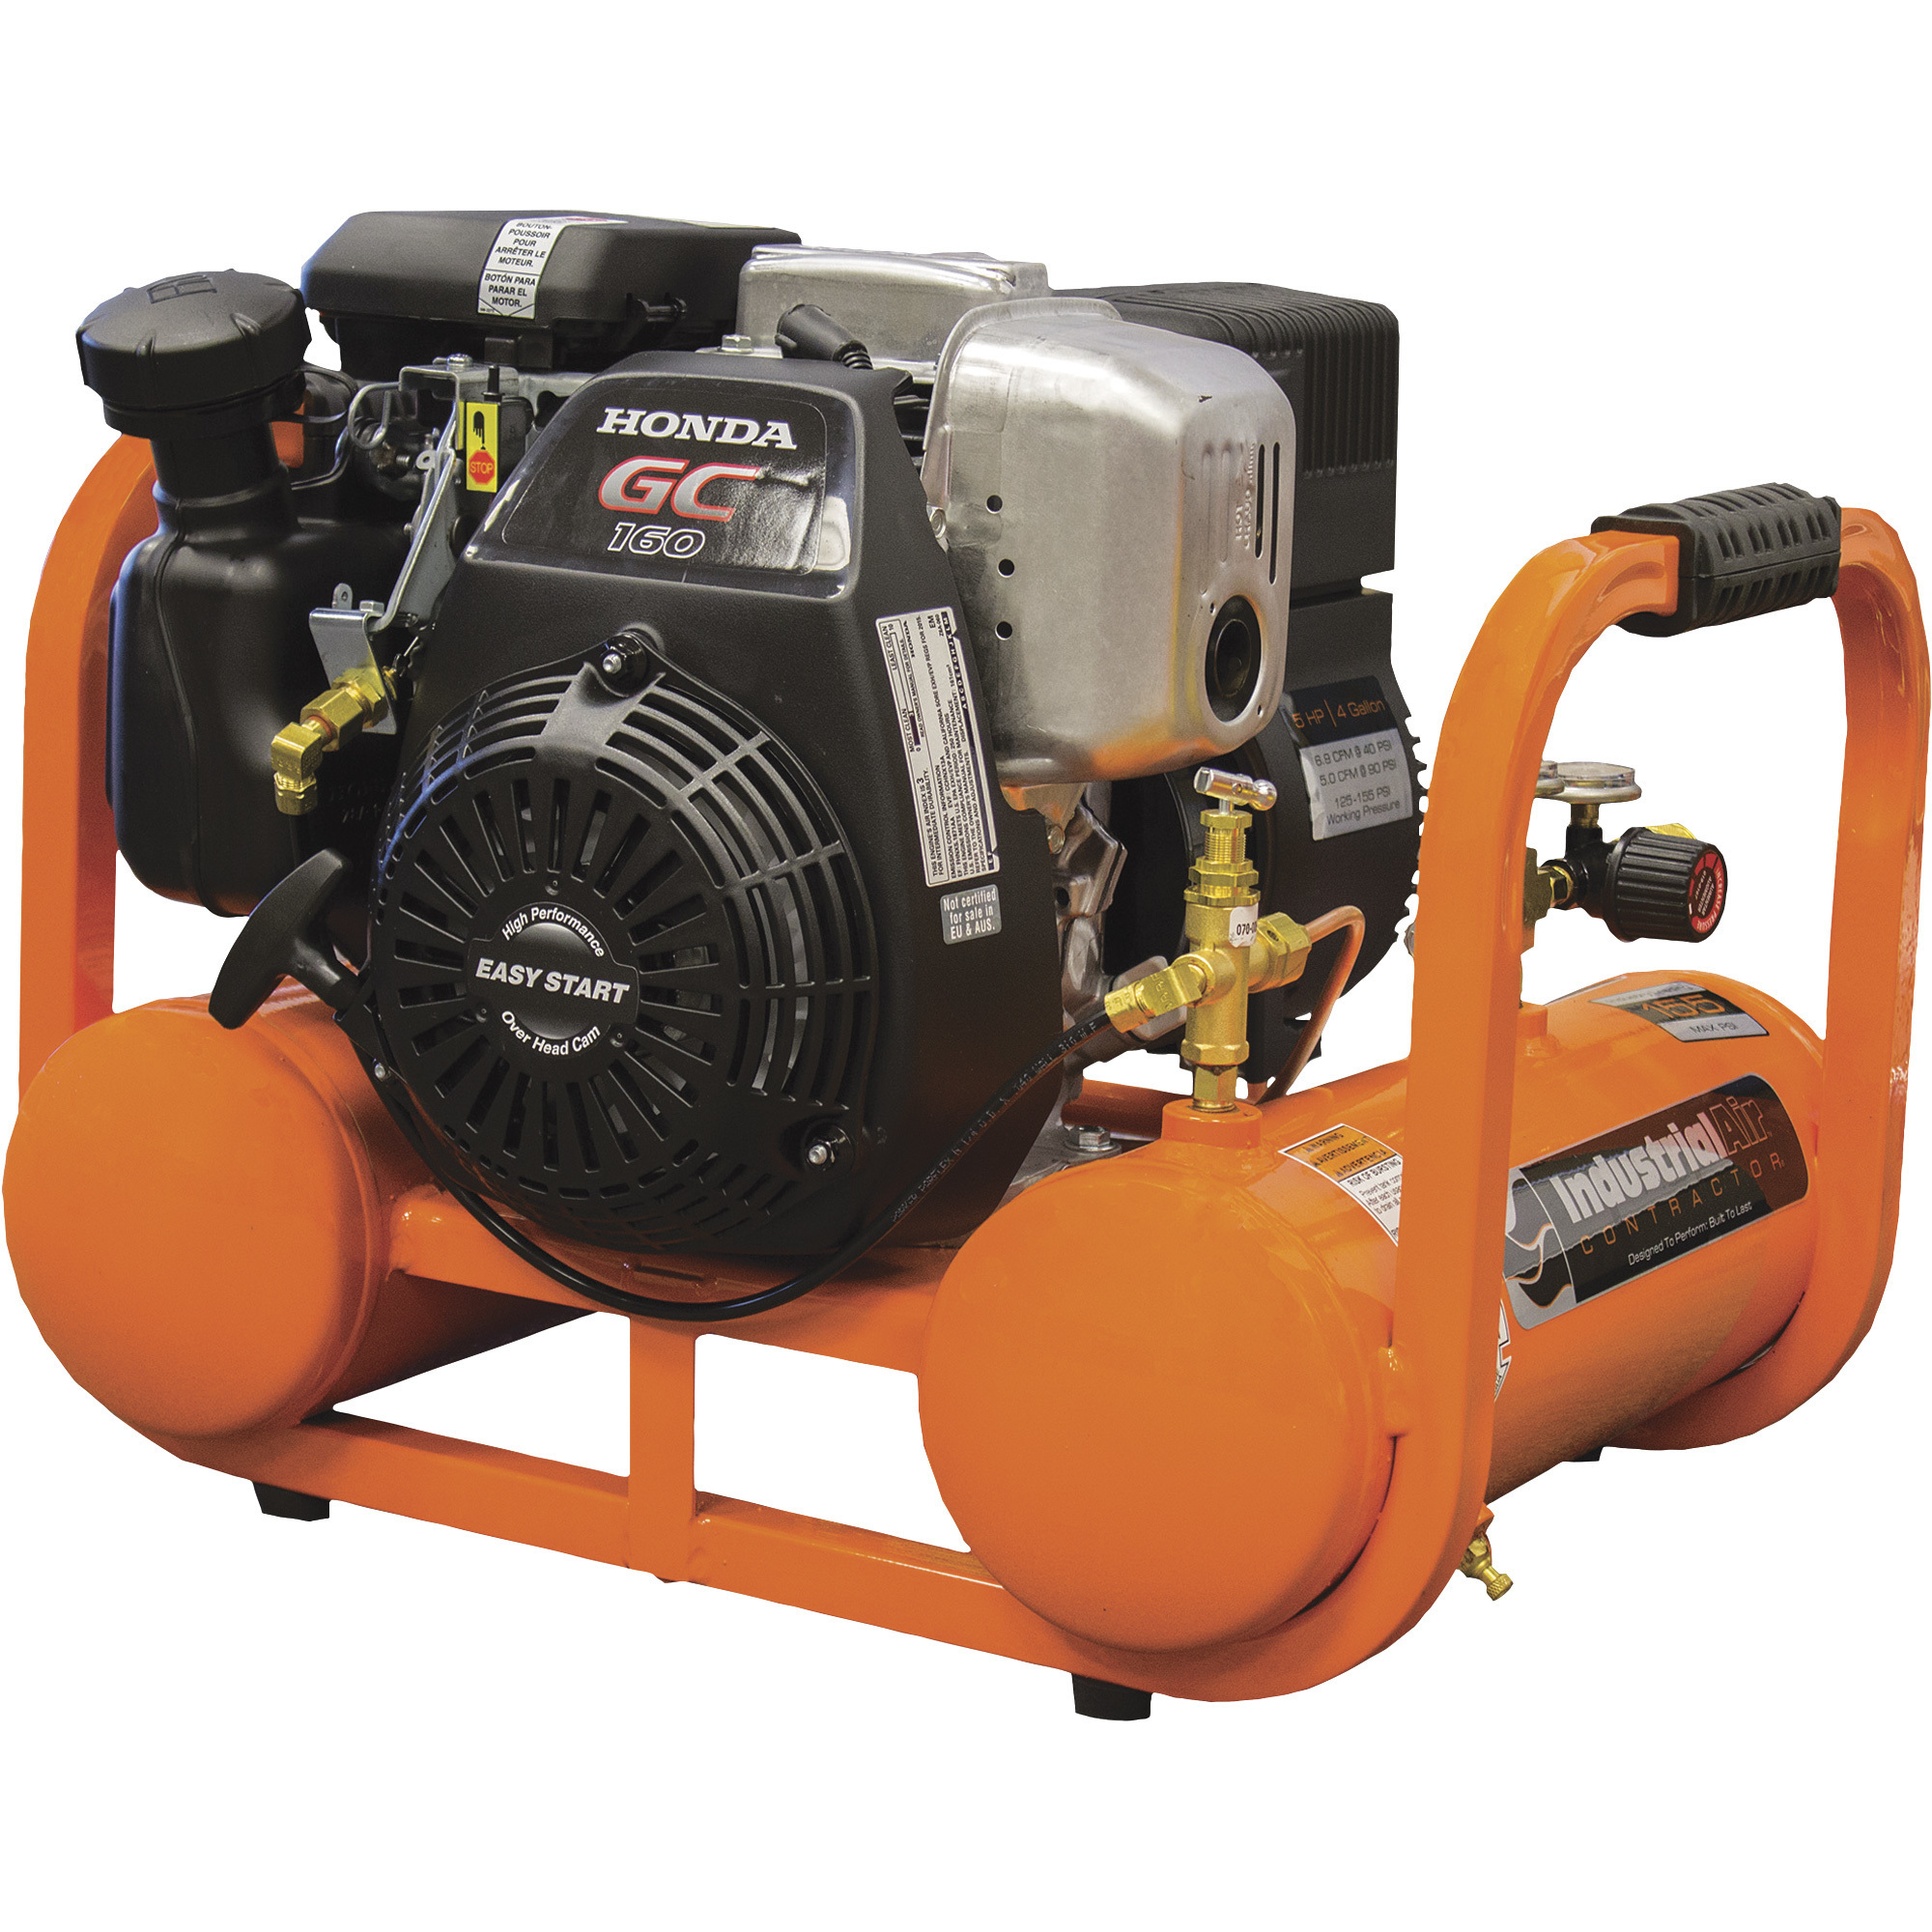 Northern Industrial Airbrush Compressor with Single Cylinder Motor